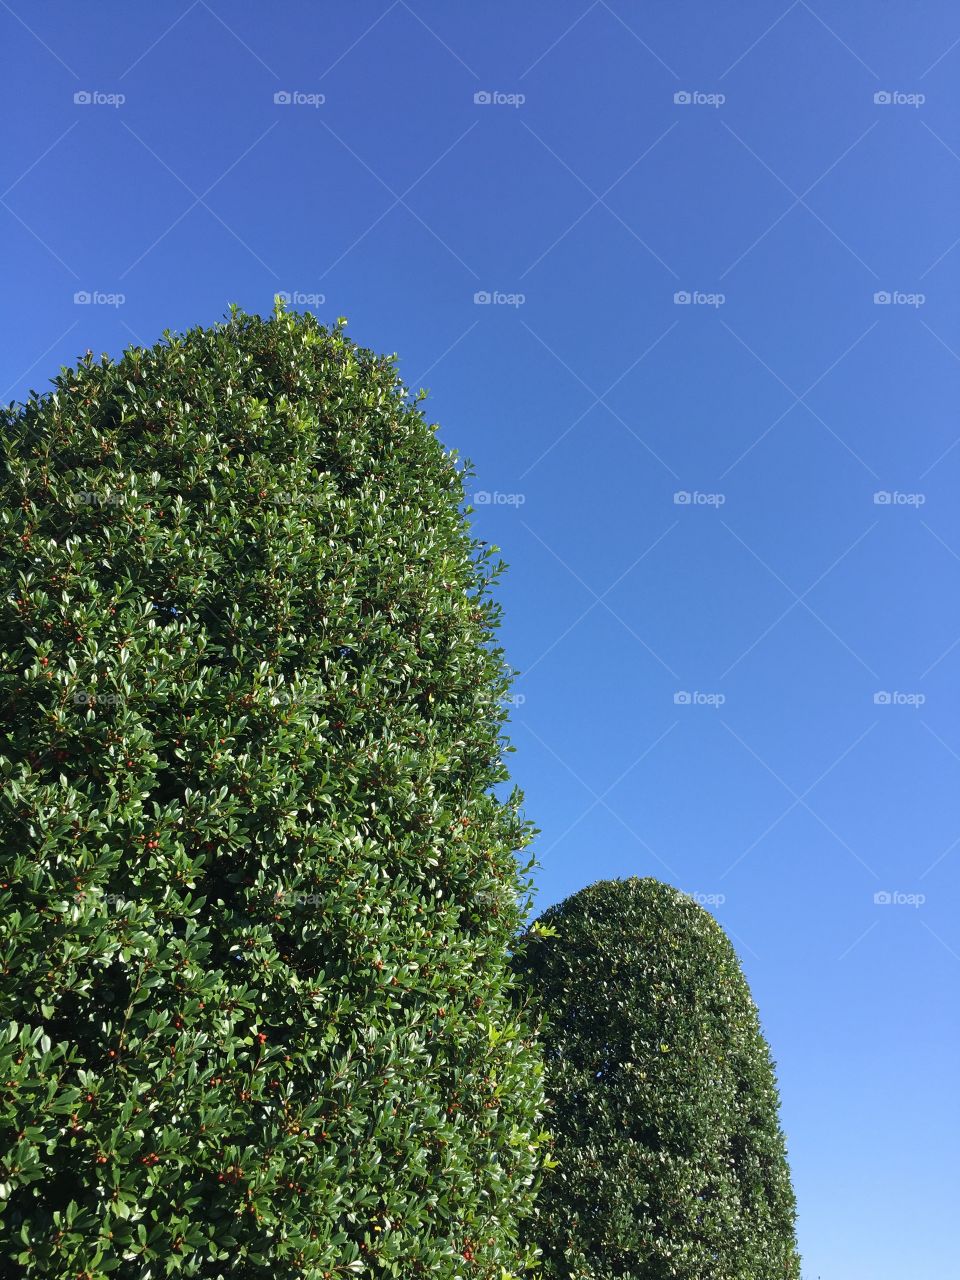 Two green landscaped trees on a clear blue sky background.